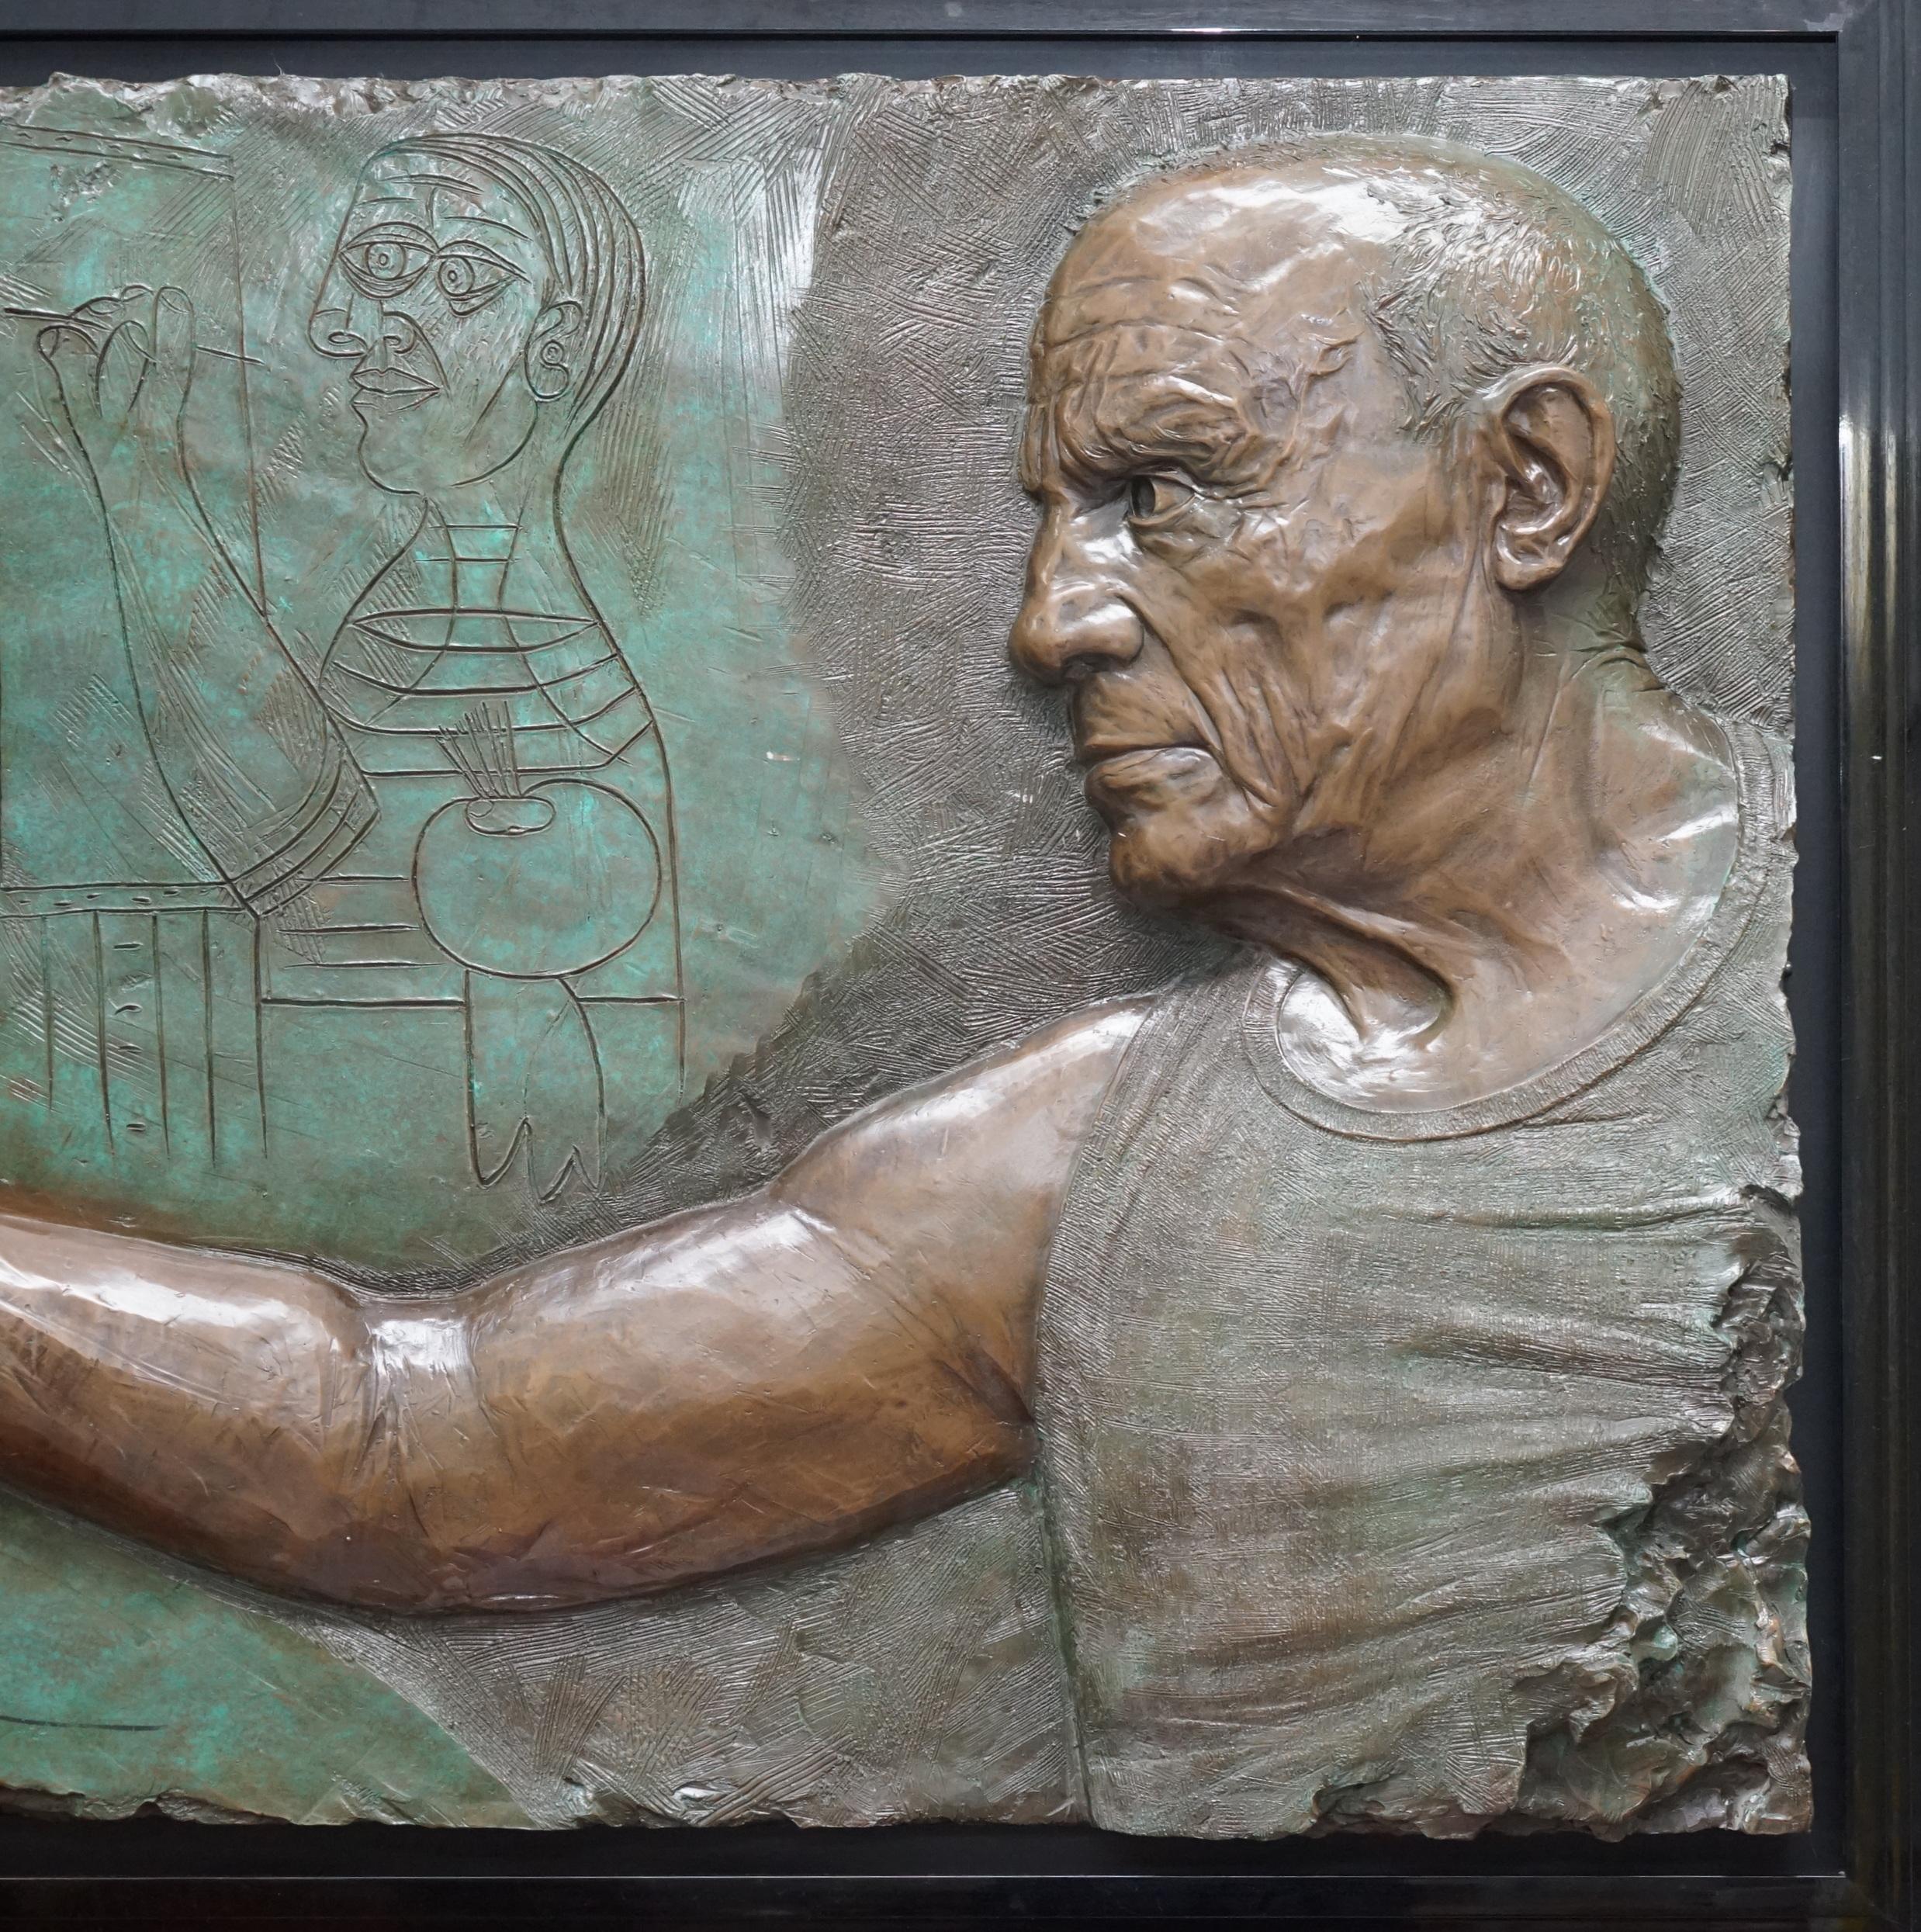 We are delighted to offer for sale this stunning and exceptionally rare 1984 low Limited Edition number 3/65 Bill Mack a tribute to Picasso bonded bronze picture RRP $100,000 (£78,500 GBP)

The impact of Bill Mack's art is achieved not only by his